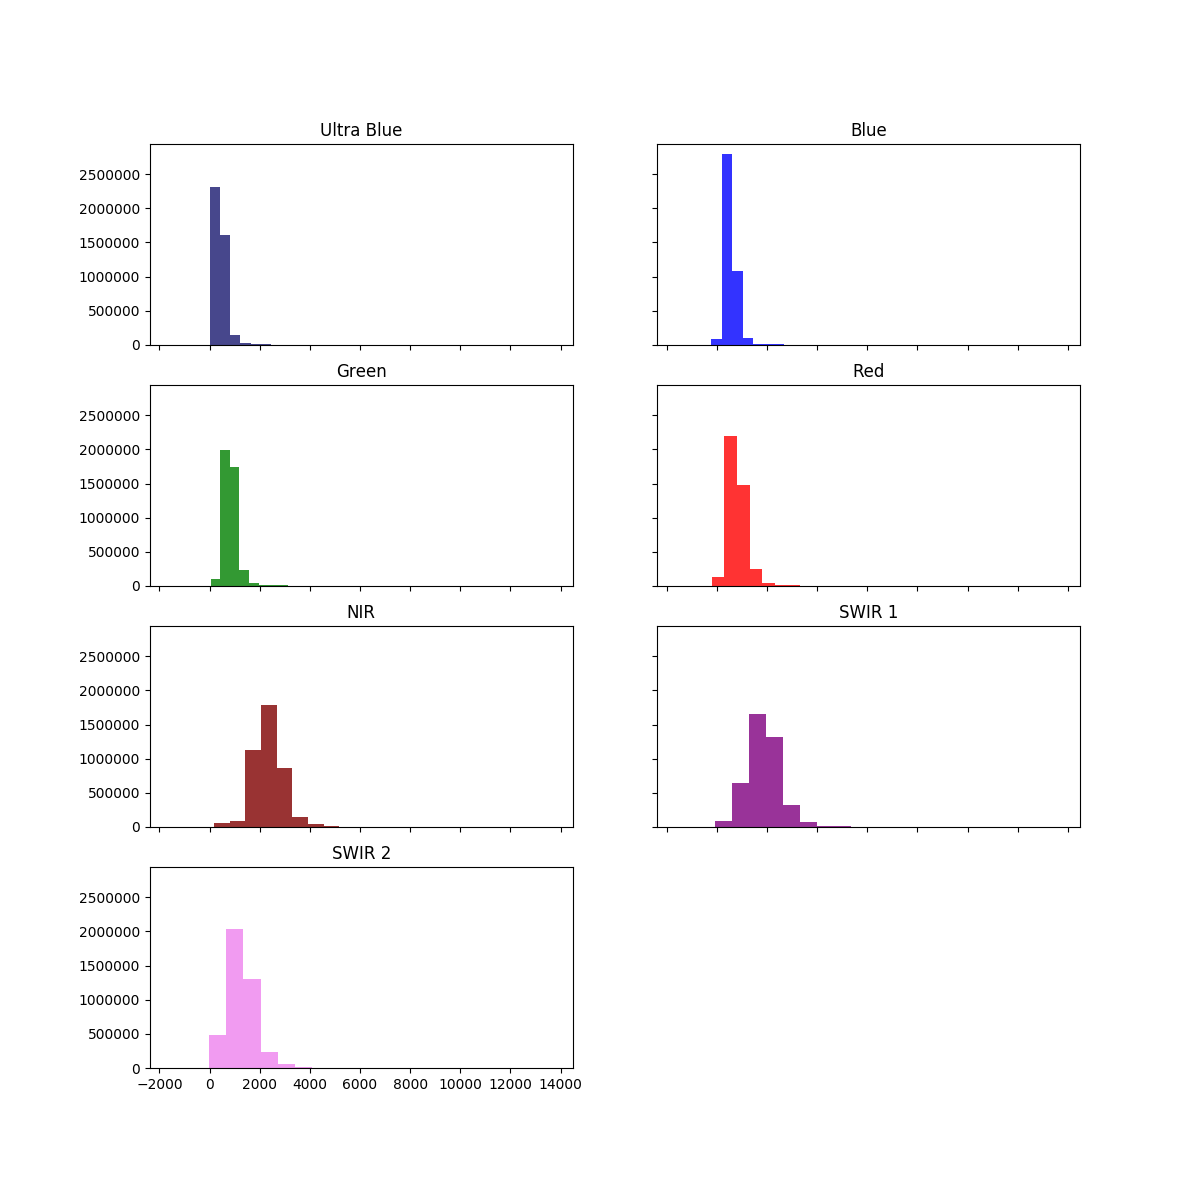 ../_images/sphx_glr_plot_hist_functionality_001.png